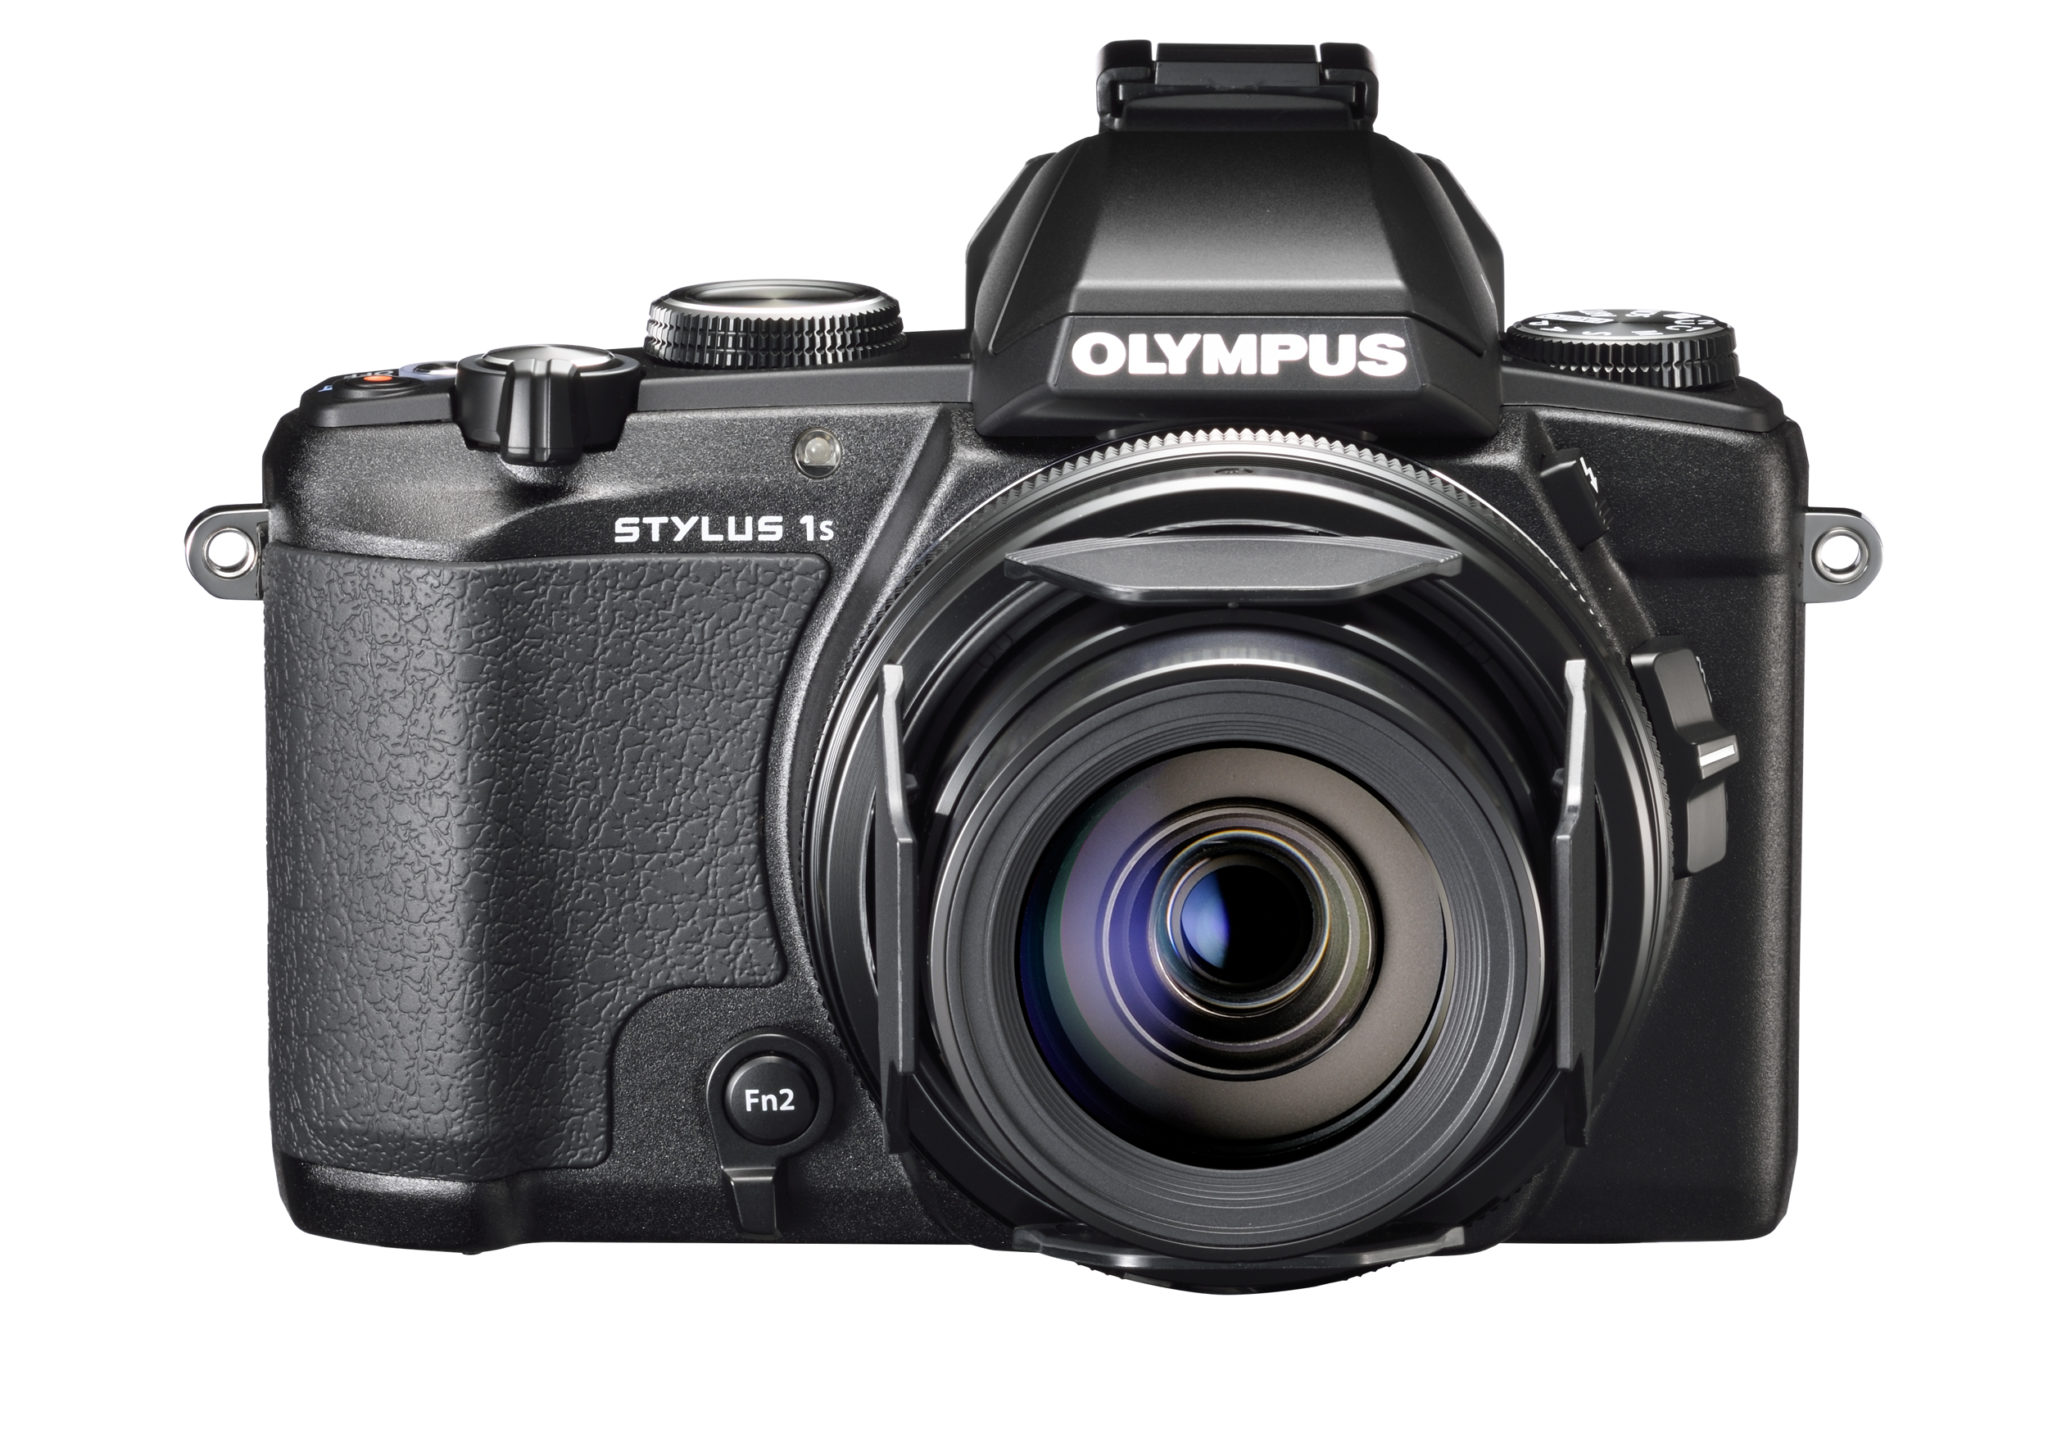 Olympus Stylus 1S Features a 28-300mm f2.8 Zoom Lens